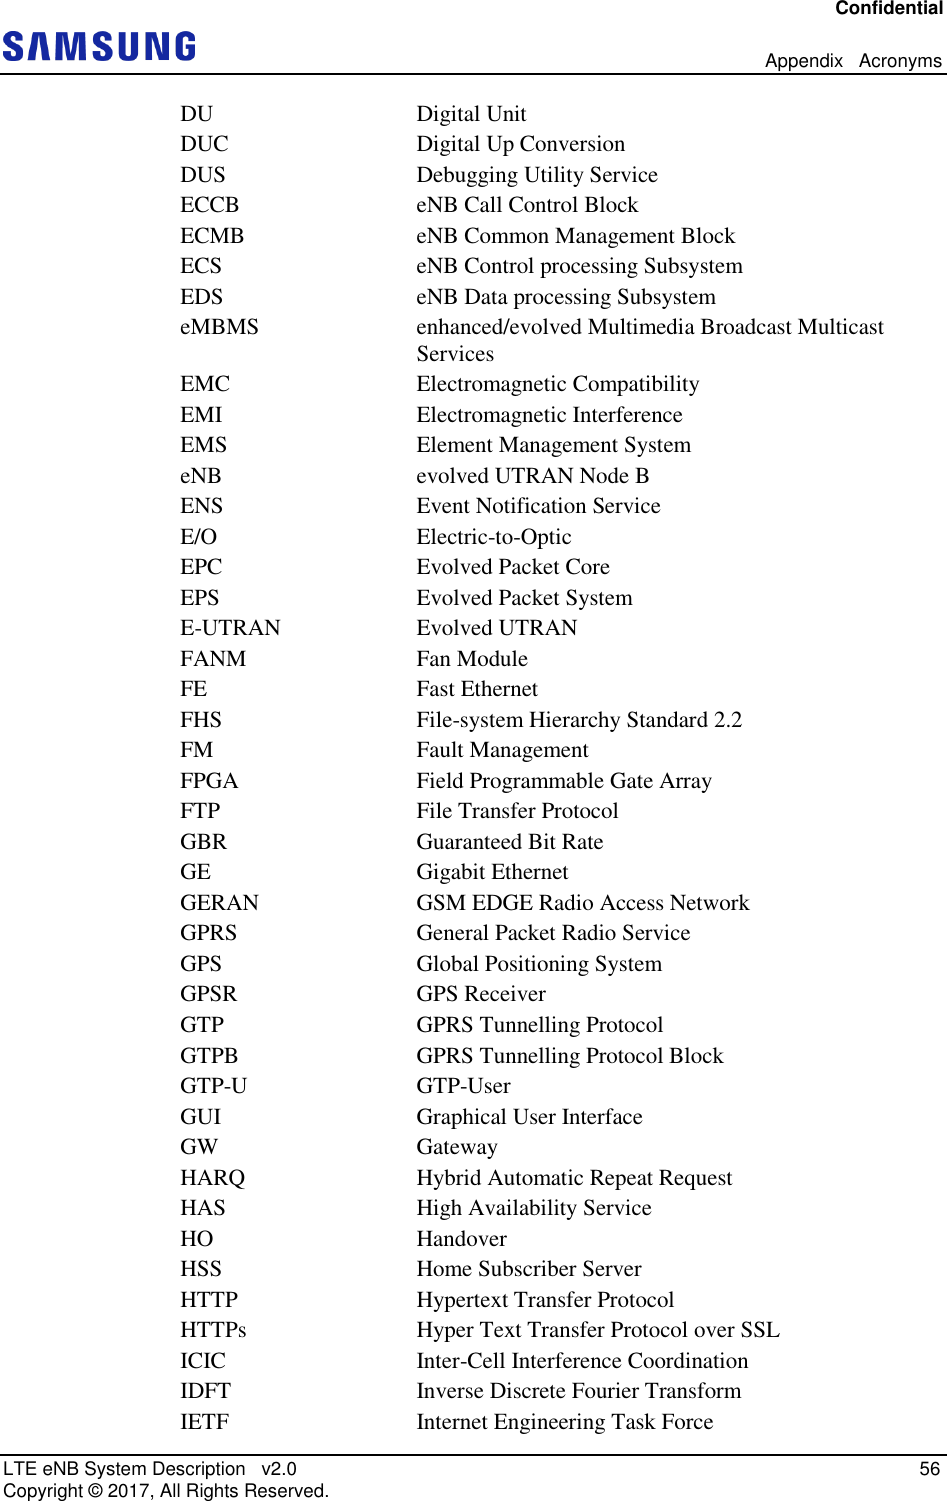 Confidential   Appendix   Acronyms LTE eNB System Description   v2.0   56 Copyright ©  2017, All Rights Reserved. DU  Digital Unit DUC  Digital Up Conversion DUS  Debugging Utility Service ECCB  eNB Call Control Block ECMB  eNB Common Management Block ECS  eNB Control processing Subsystem EDS  eNB Data processing Subsystem eMBMS  enhanced/evolved Multimedia Broadcast Multicast Services EMC  Electromagnetic Compatibility EMI  Electromagnetic Interference EMS  Element Management System eNB  evolved UTRAN Node B ENS  Event Notification Service E/O  Electric-to-Optic EPC  Evolved Packet Core EPS  Evolved Packet System E-UTRAN  Evolved UTRAN FANM  Fan Module FE  Fast Ethernet FHS  File-system Hierarchy Standard 2.2 FM  Fault Management FPGA  Field Programmable Gate Array FTP  File Transfer Protocol GBR  Guaranteed Bit Rate GE  Gigabit Ethernet GERAN  GSM EDGE Radio Access Network GPRS  General Packet Radio Service GPS  Global Positioning System GPSR  GPS Receiver GTP  GPRS Tunnelling Protocol GTPB  GPRS Tunnelling Protocol Block GTP-U  GTP-User GUI  Graphical User Interface GW  Gateway HARQ  Hybrid Automatic Repeat Request HAS  High Availability Service HO  Handover HSS  Home Subscriber Server HTTP  Hypertext Transfer Protocol HTTPs  Hyper Text Transfer Protocol over SSL ICIC  Inter-Cell Interference Coordination IDFT  Inverse Discrete Fourier Transform IETF  Internet Engineering Task Force 